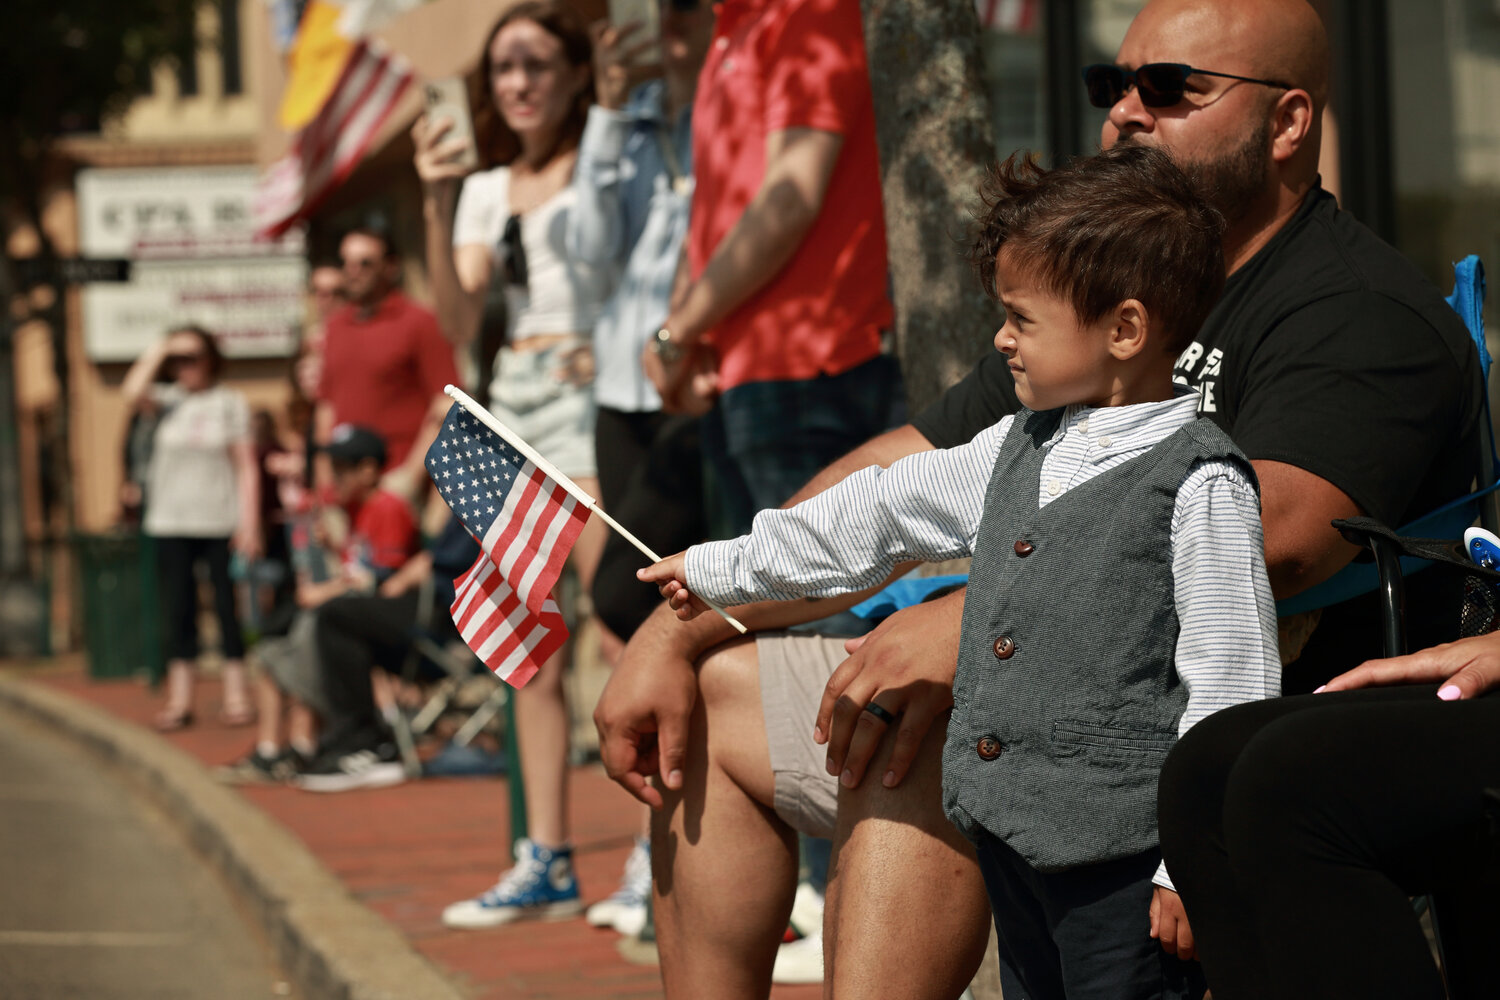 3-yearold Grayson Morales of Lynbrook honors the spirit for Memorial Day with an American flag.